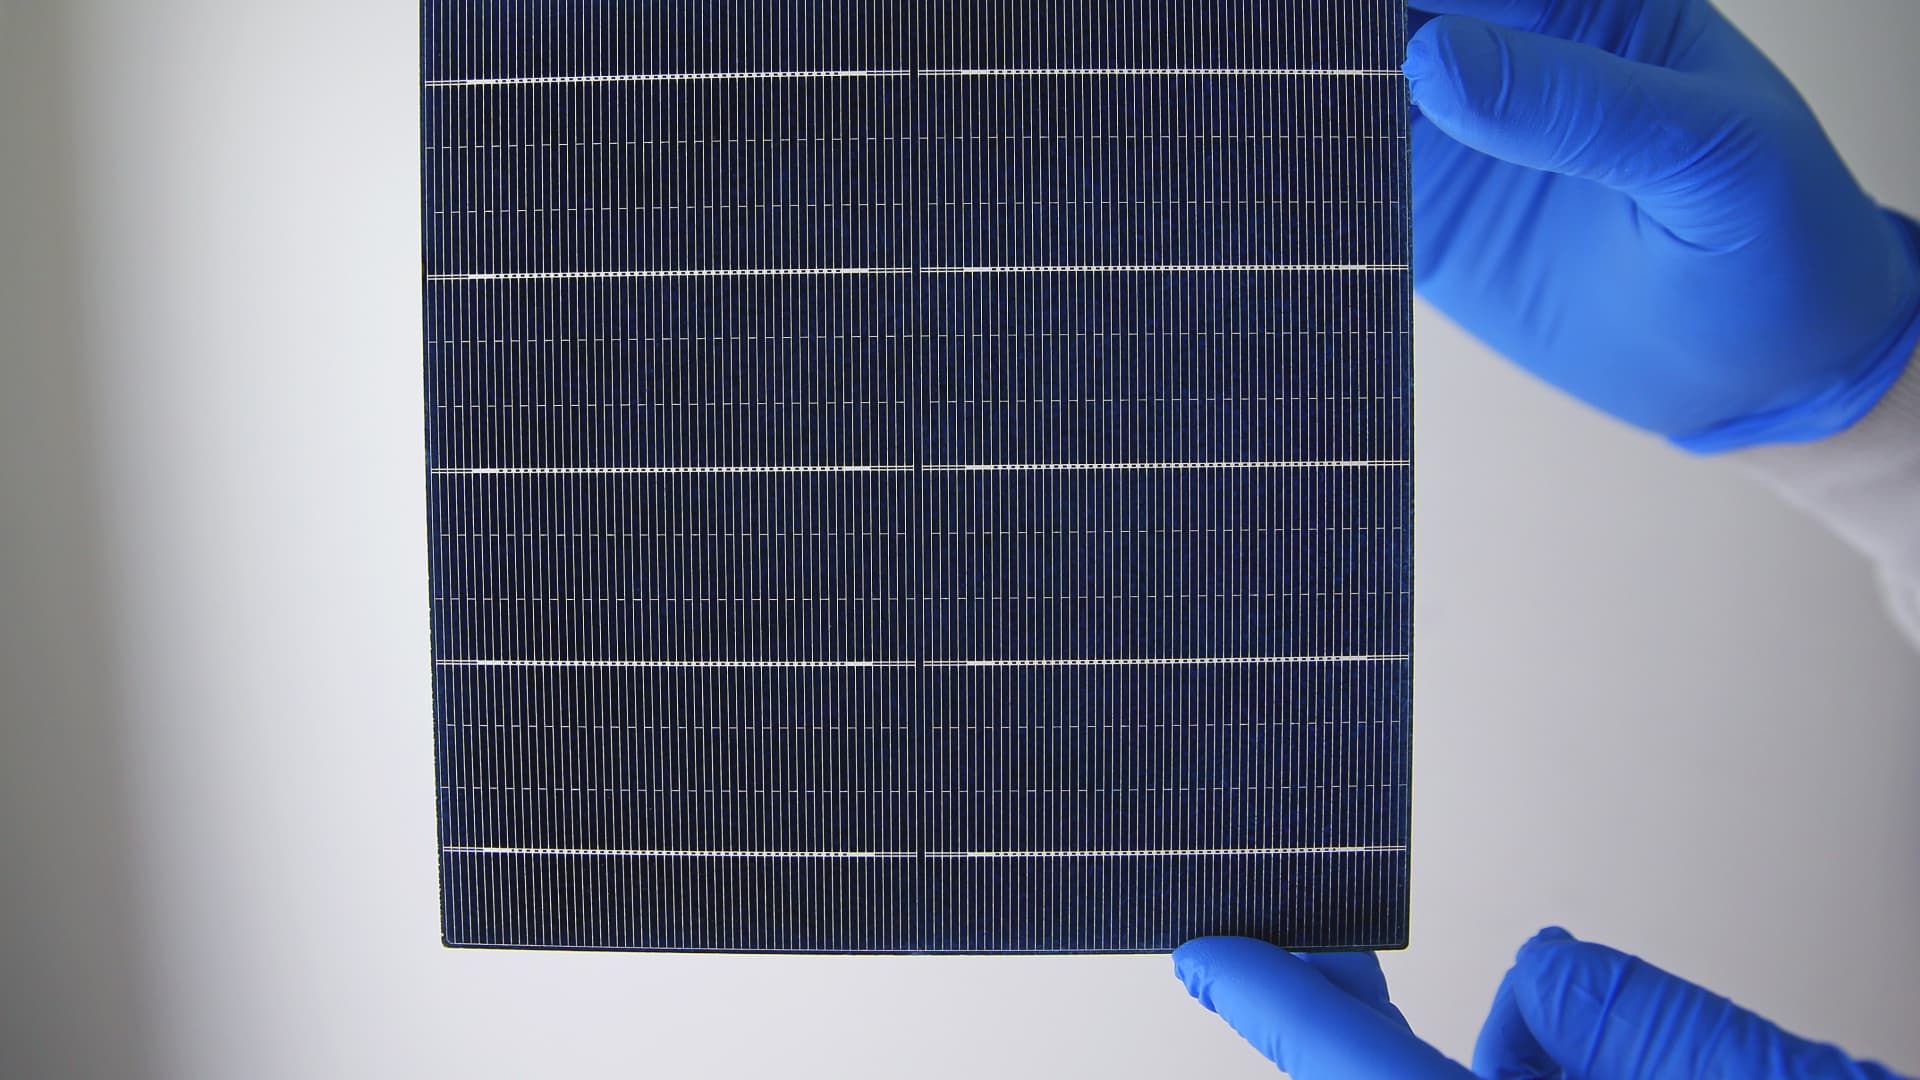 A Bill Gates-based photovoltaic technology that may be solar energy's future